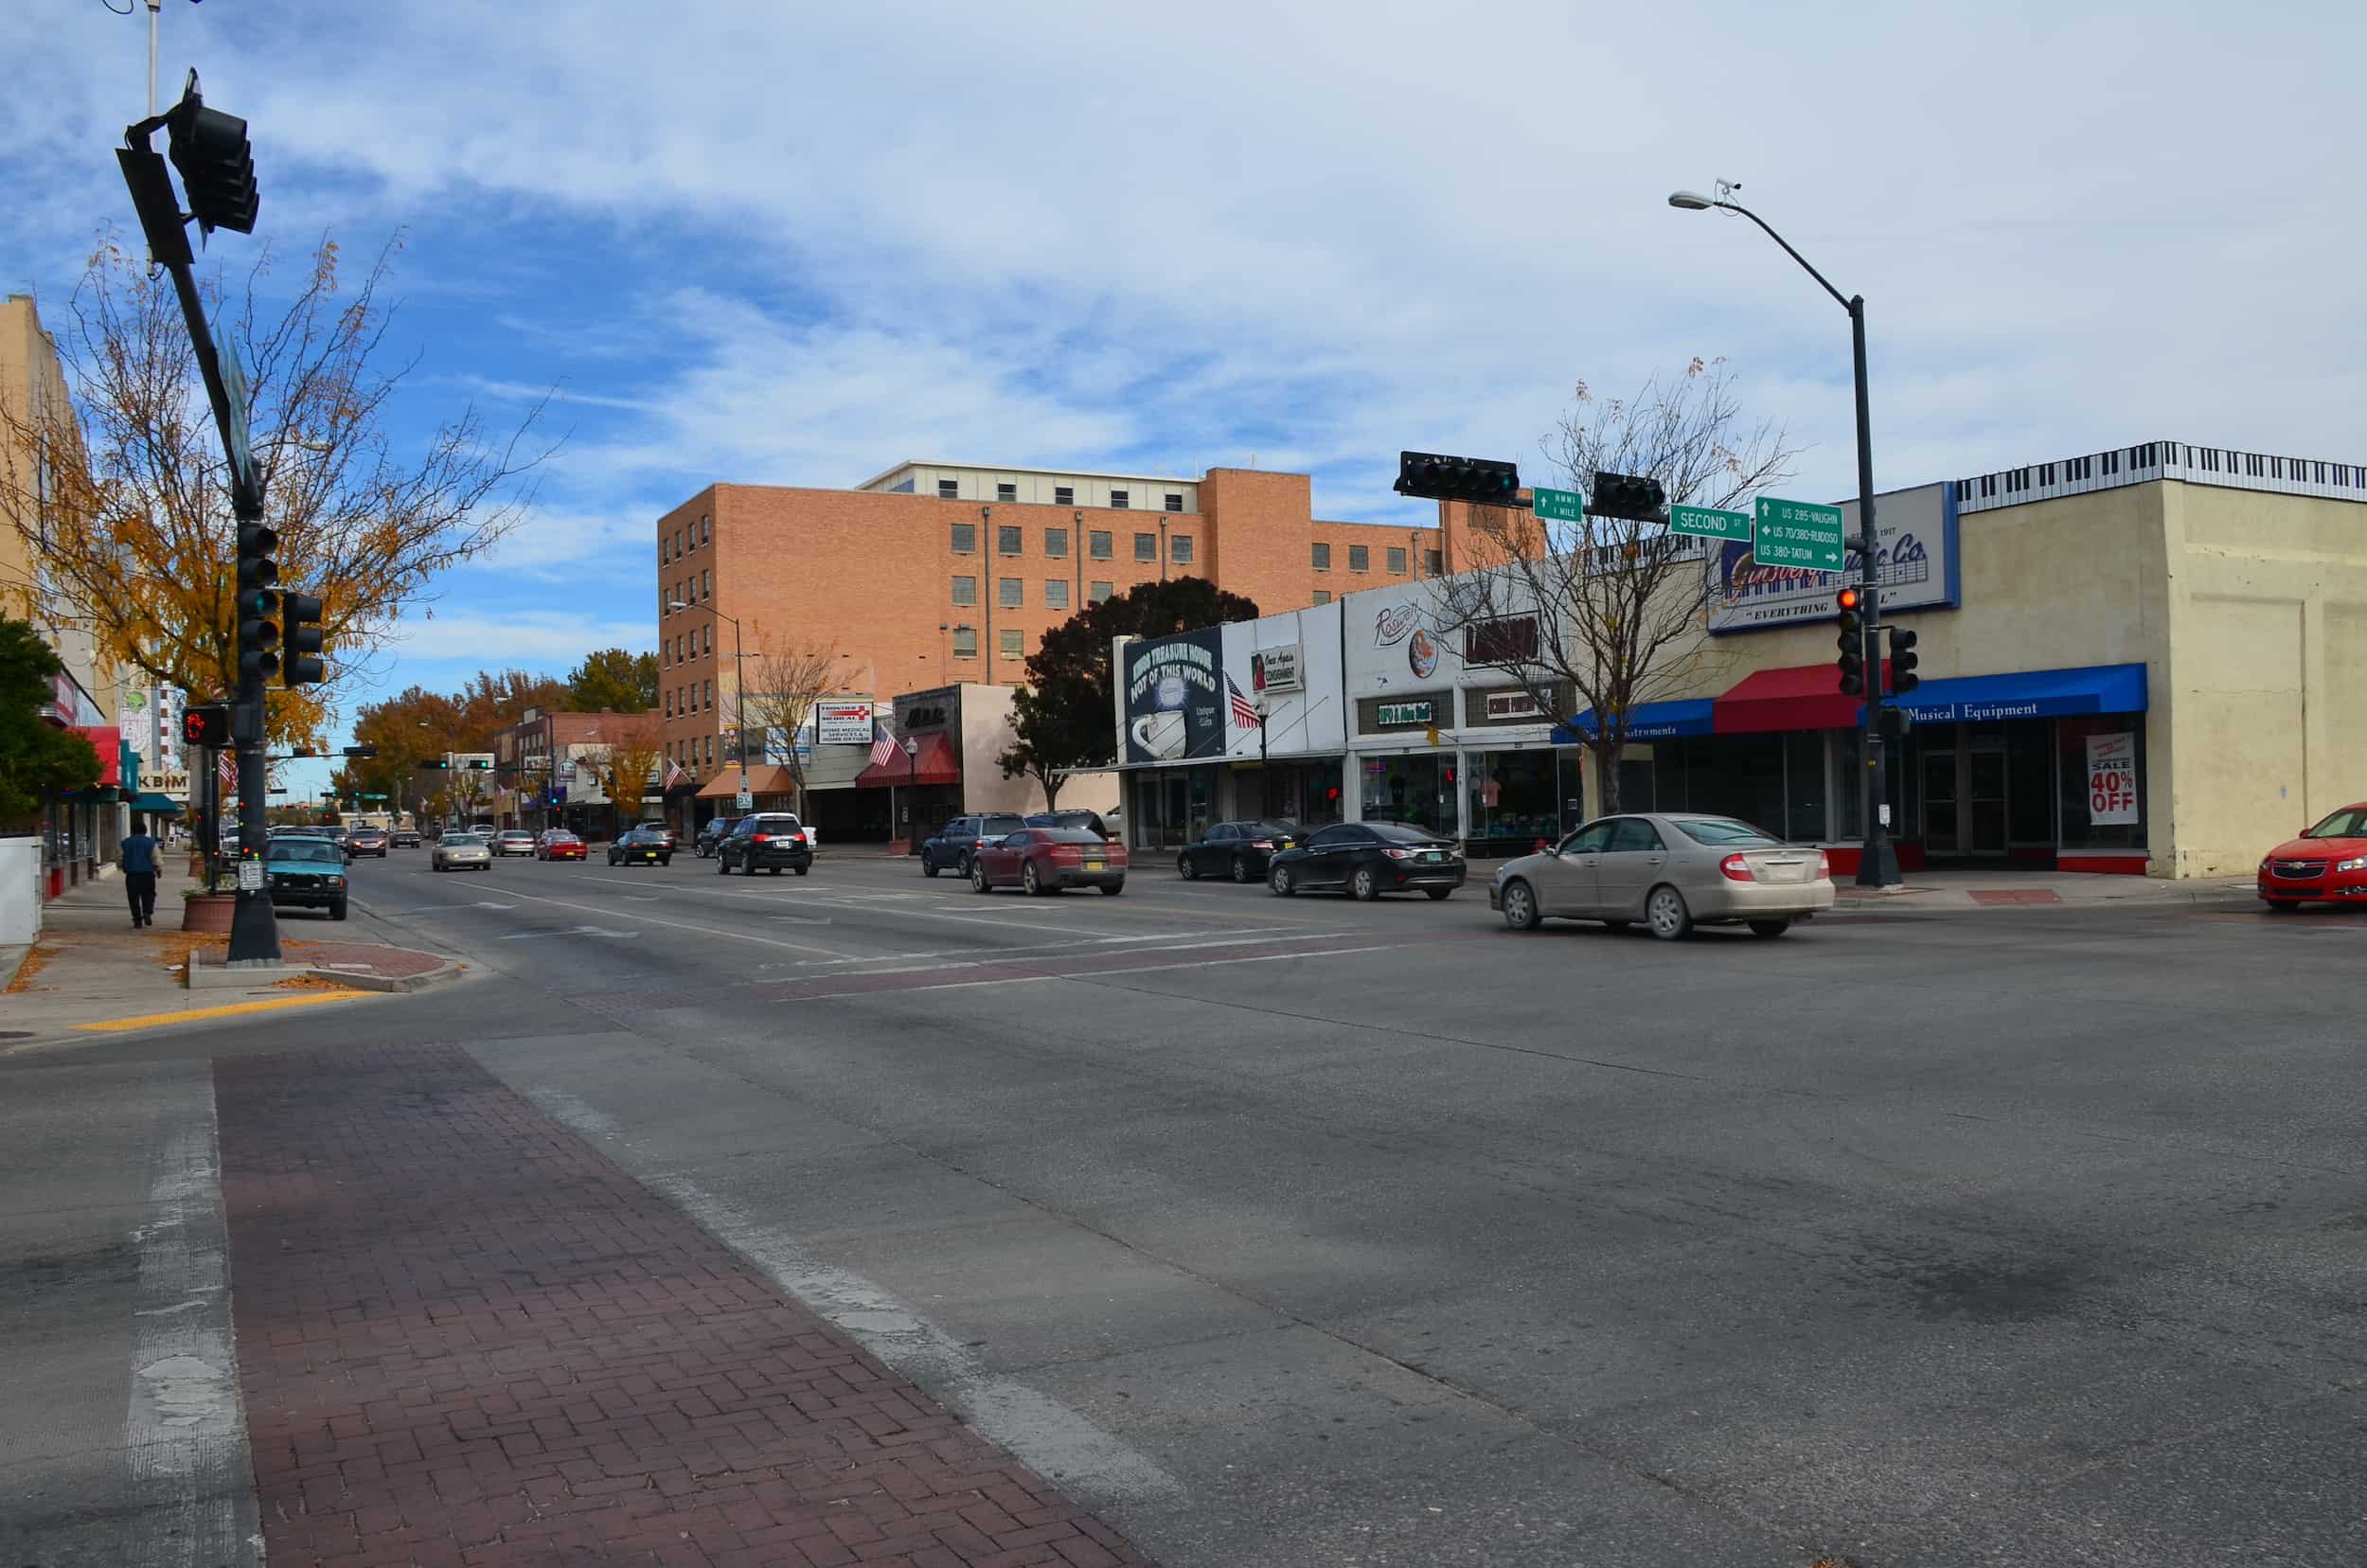 Downtown Roswell, New Mexico